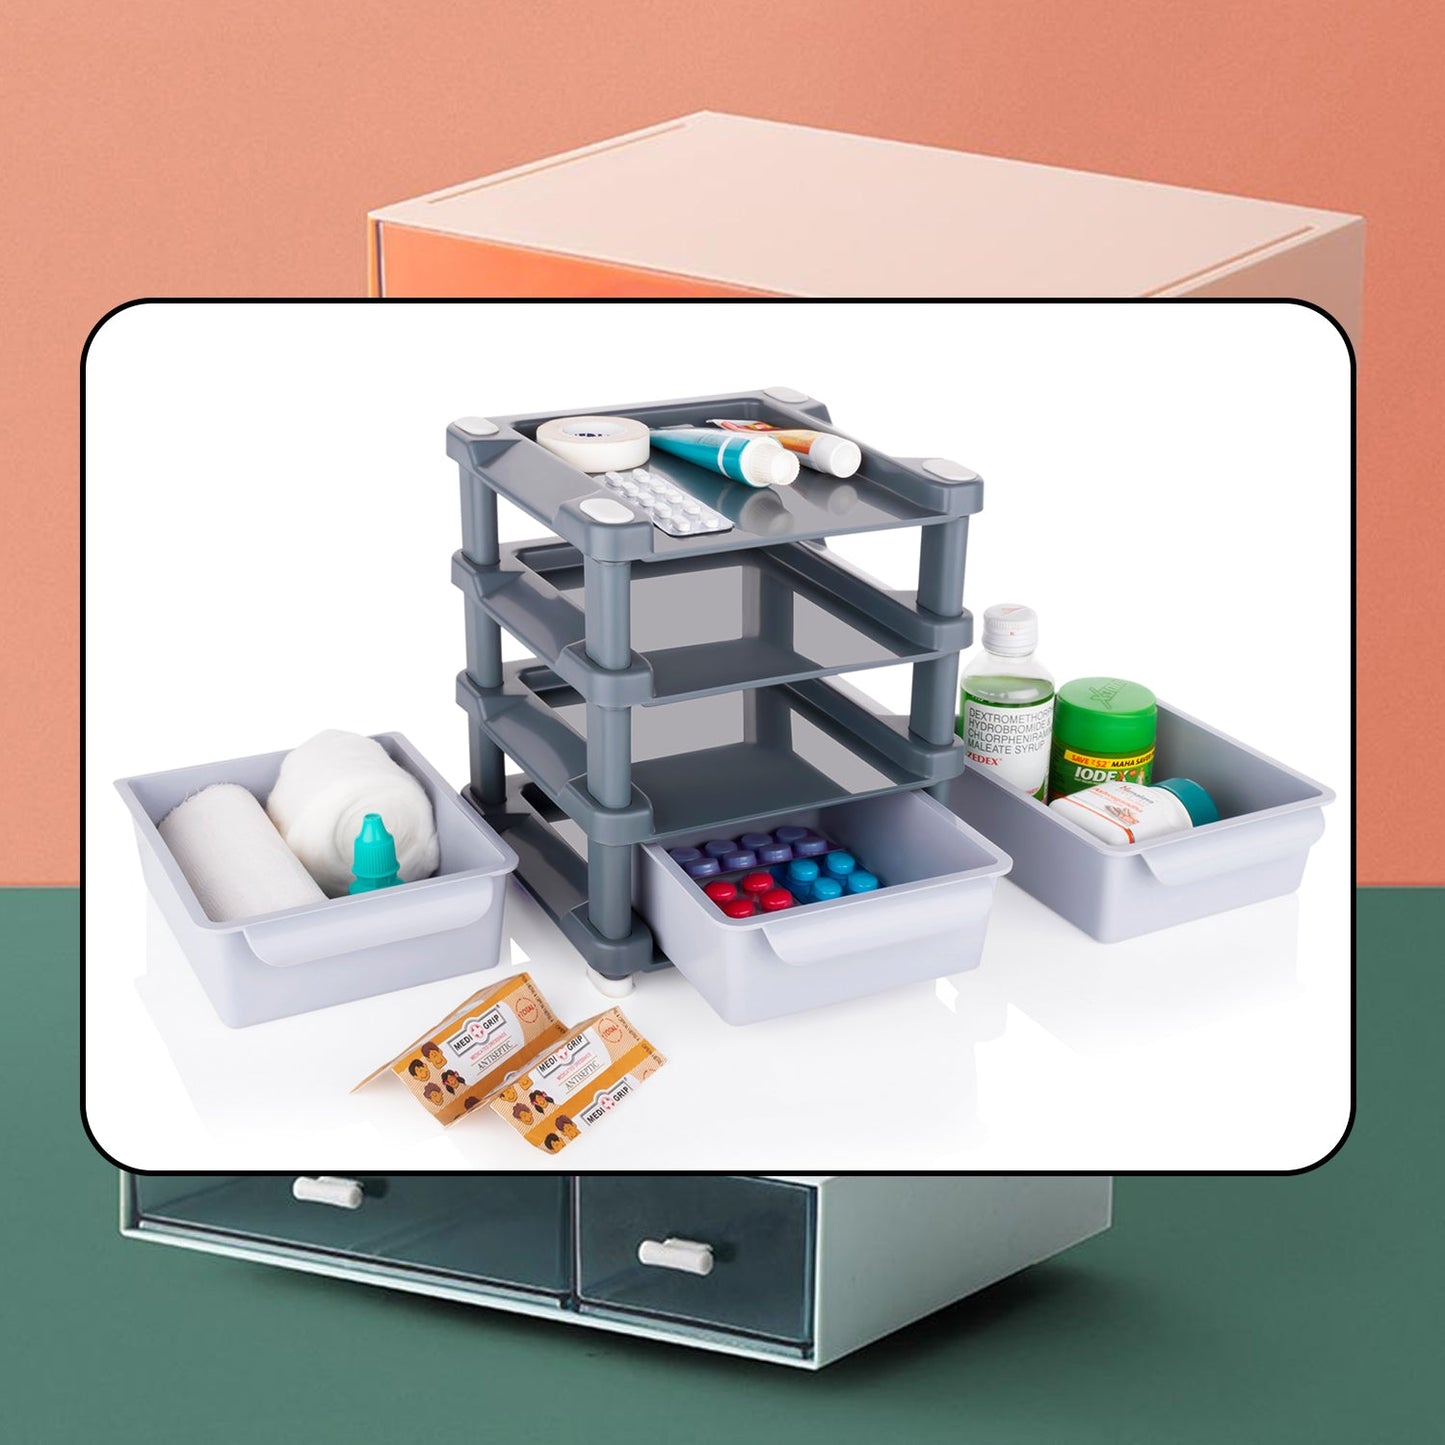 4767 Mini 3 Layer Drawer Used for storing makeup equipment’s and kits used by women’s and ladies. DeoDap